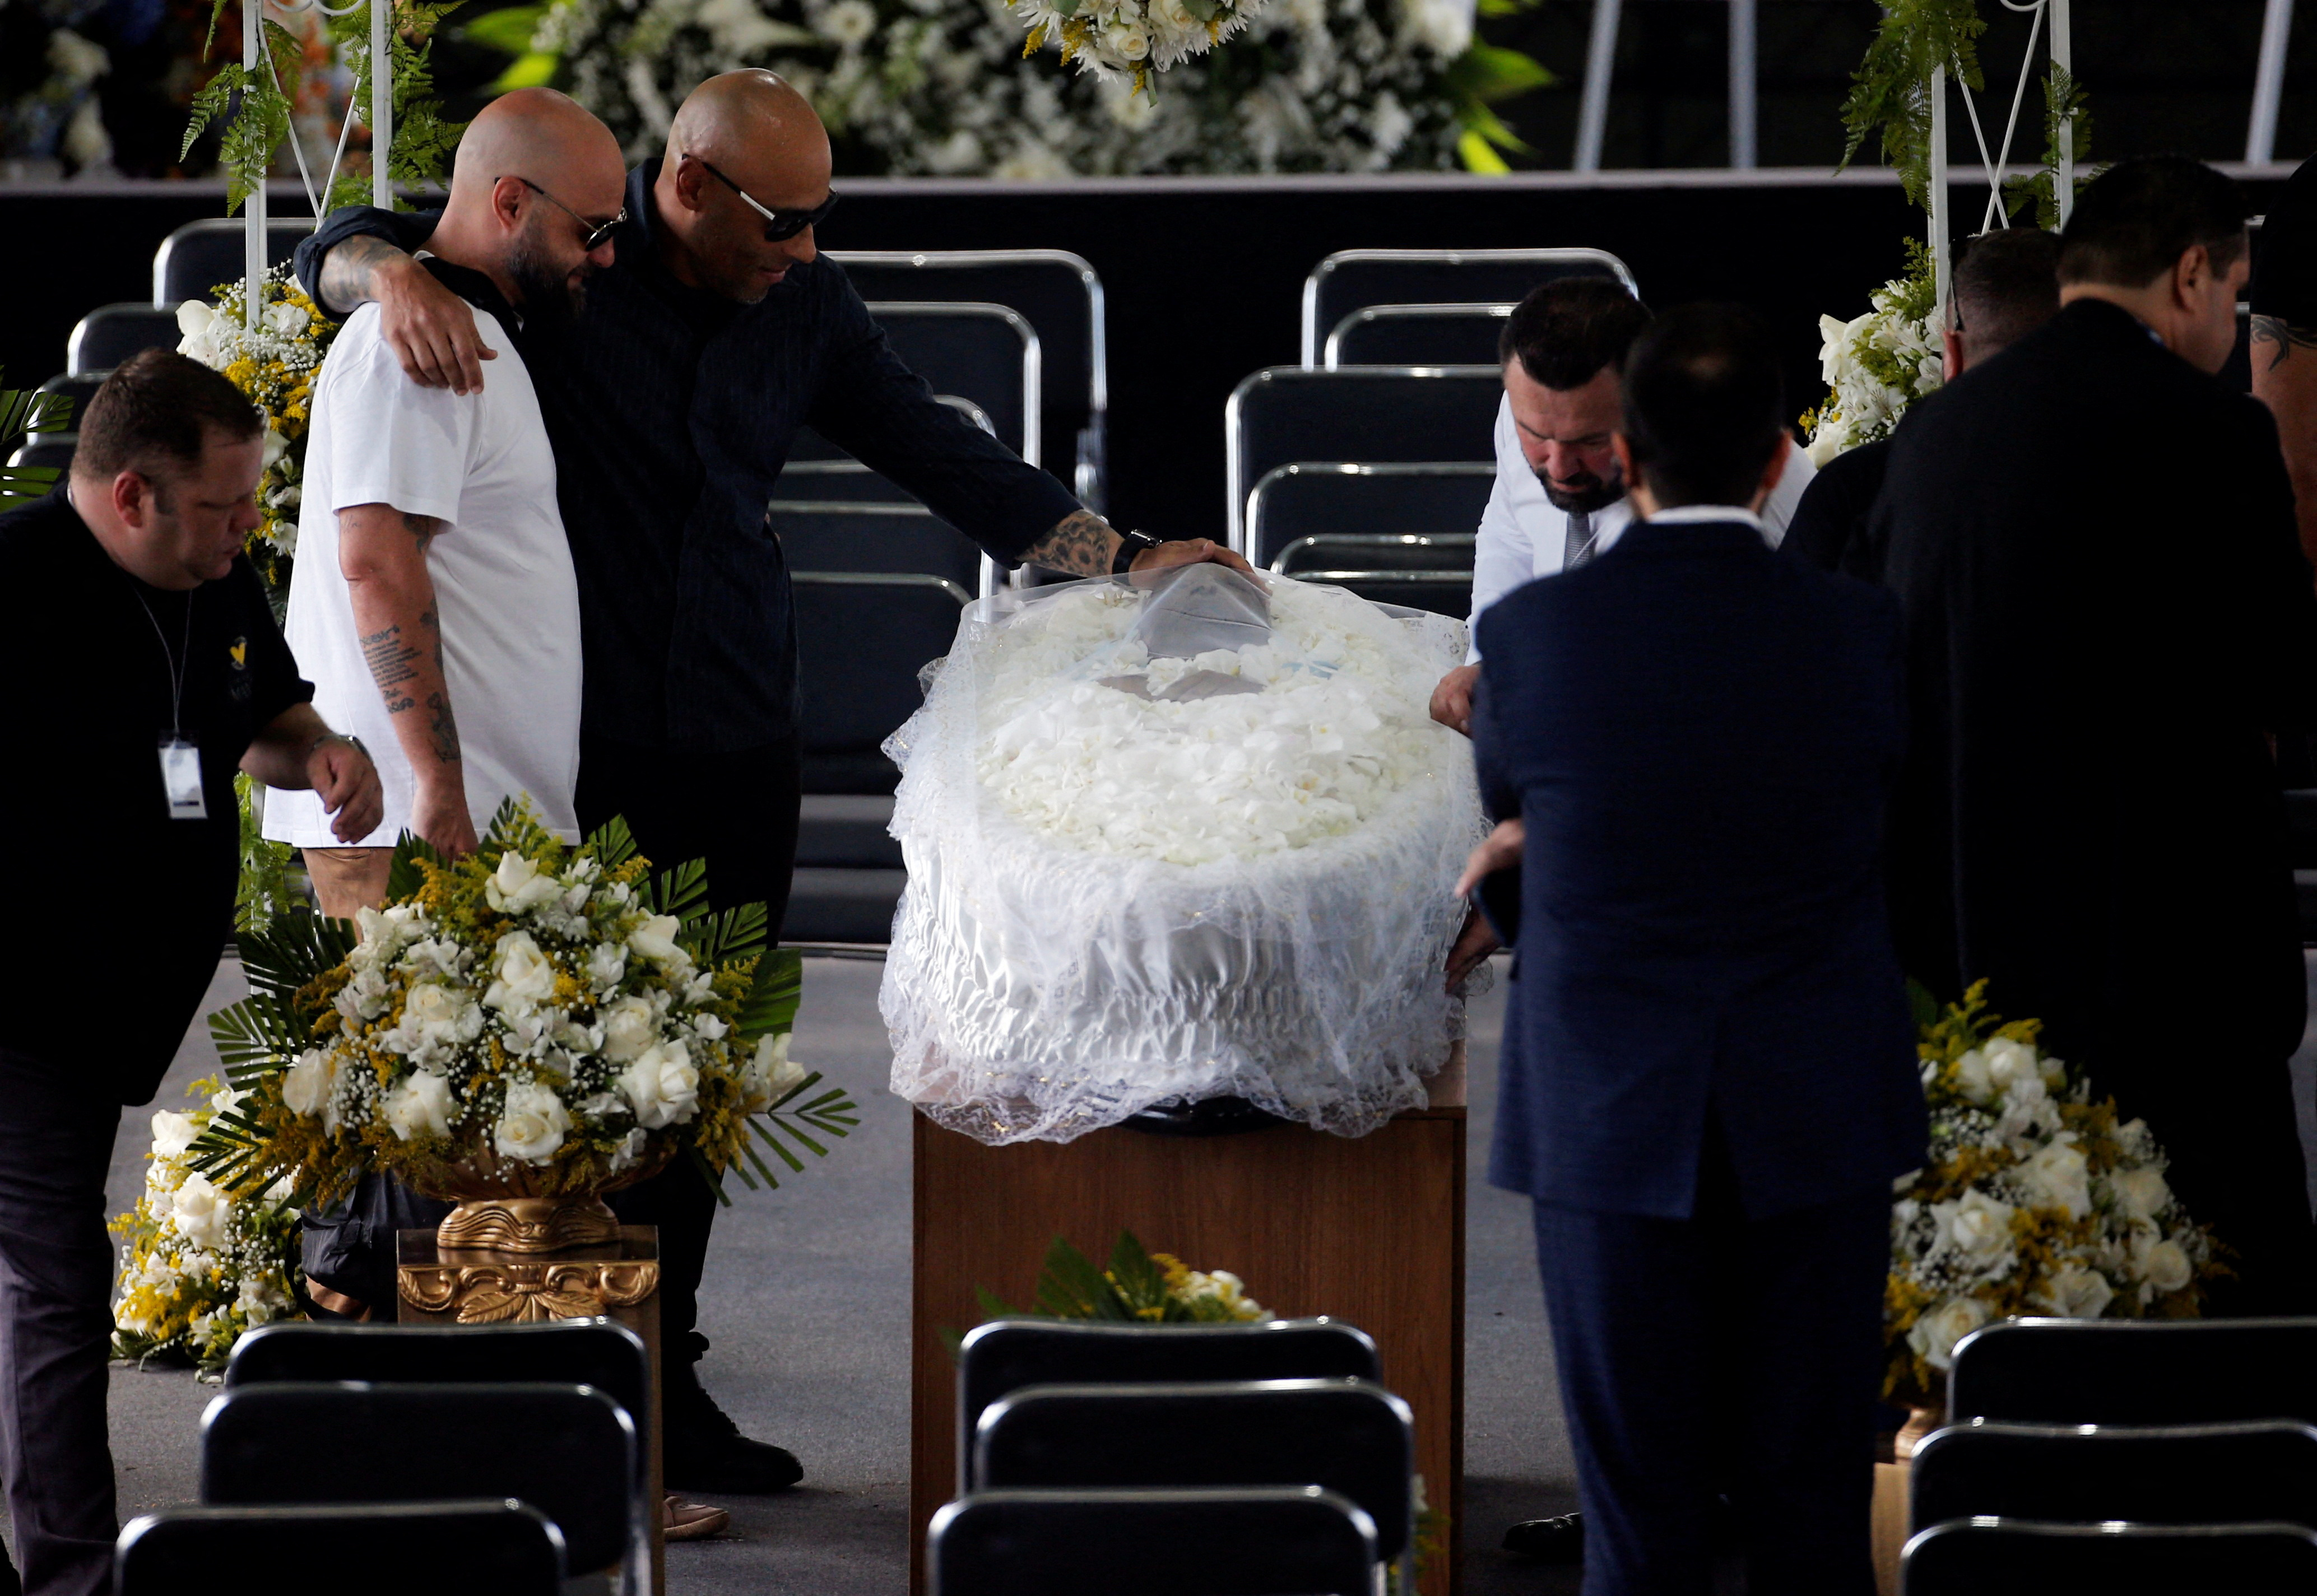 Soccer Football - Death of Brazilian soccer legend Pele - Vila Belmiro Stadium, Santos, Brazil - January 2, 2023 SENSITIVE MATERIAL. THIS IMAGE MAY OFFEND OR DISTURB Pele's son Edinho is pictured as the body of Brazilian soccer legend Pele is seen in his casket, as he lays in state on the pitch of his former club Santos' Vila Belmiro stadium REUTERS/Diego Vara